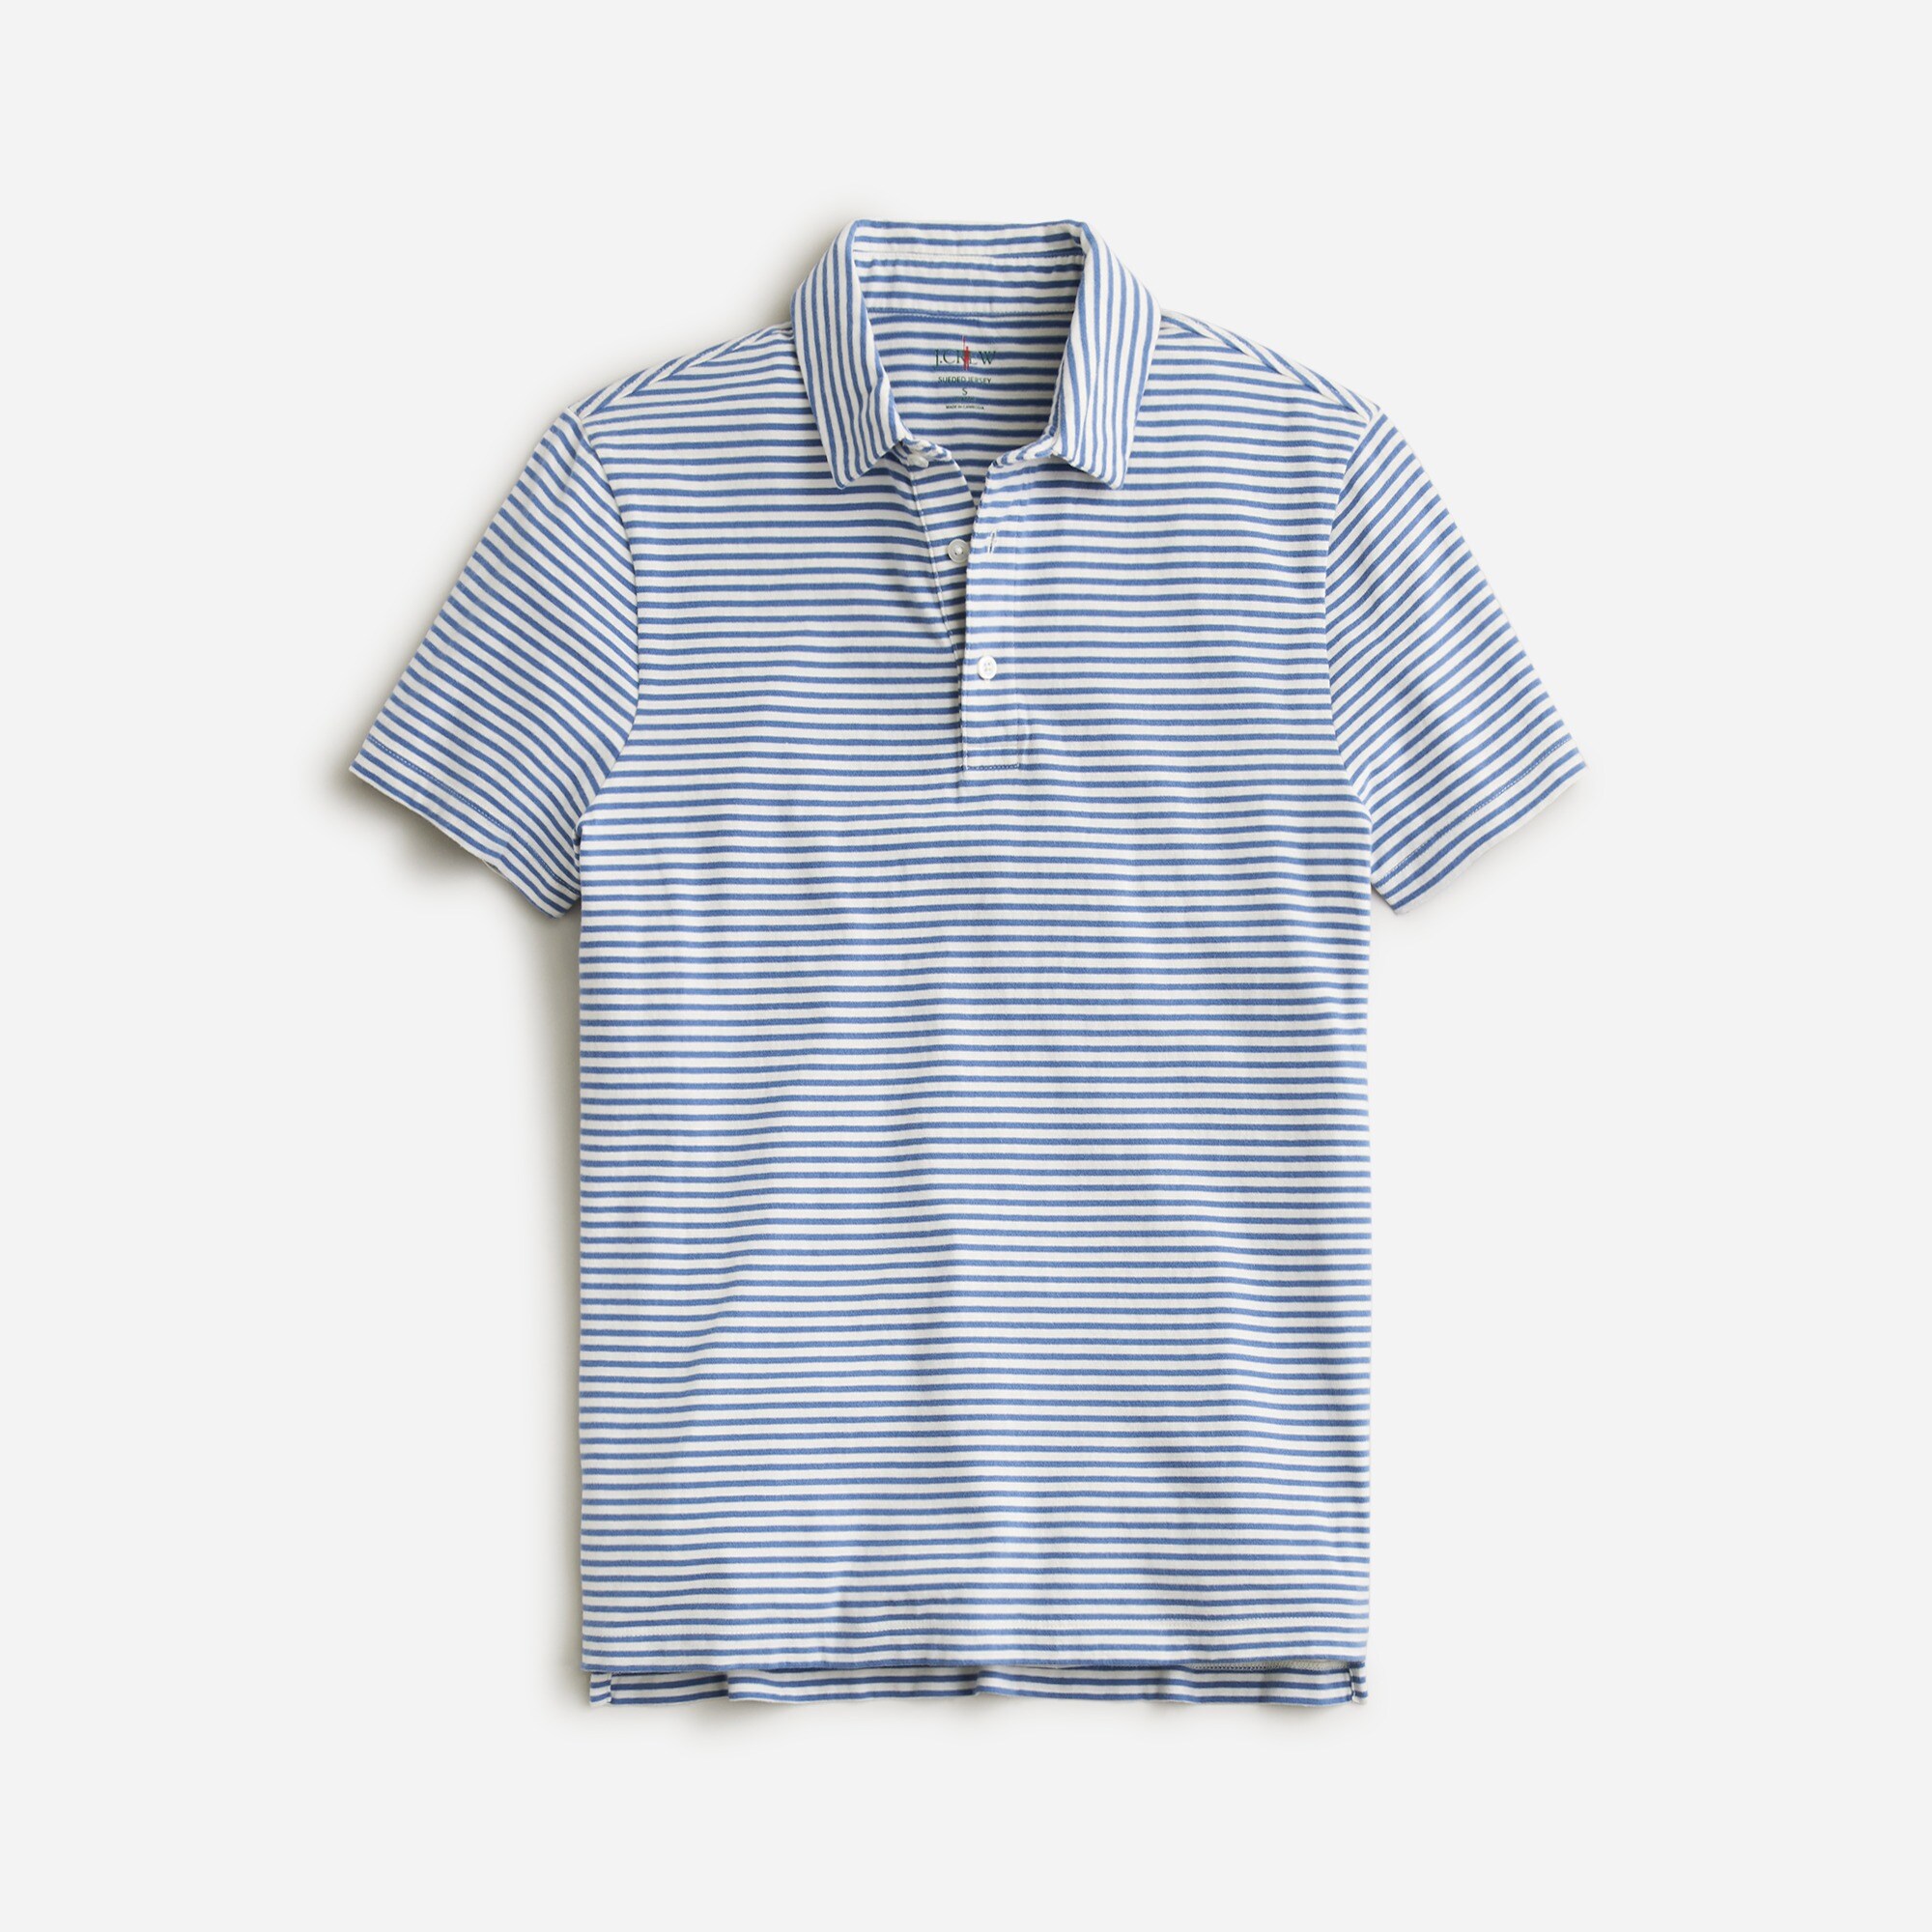  Sueded cotton polo shirt in stripe